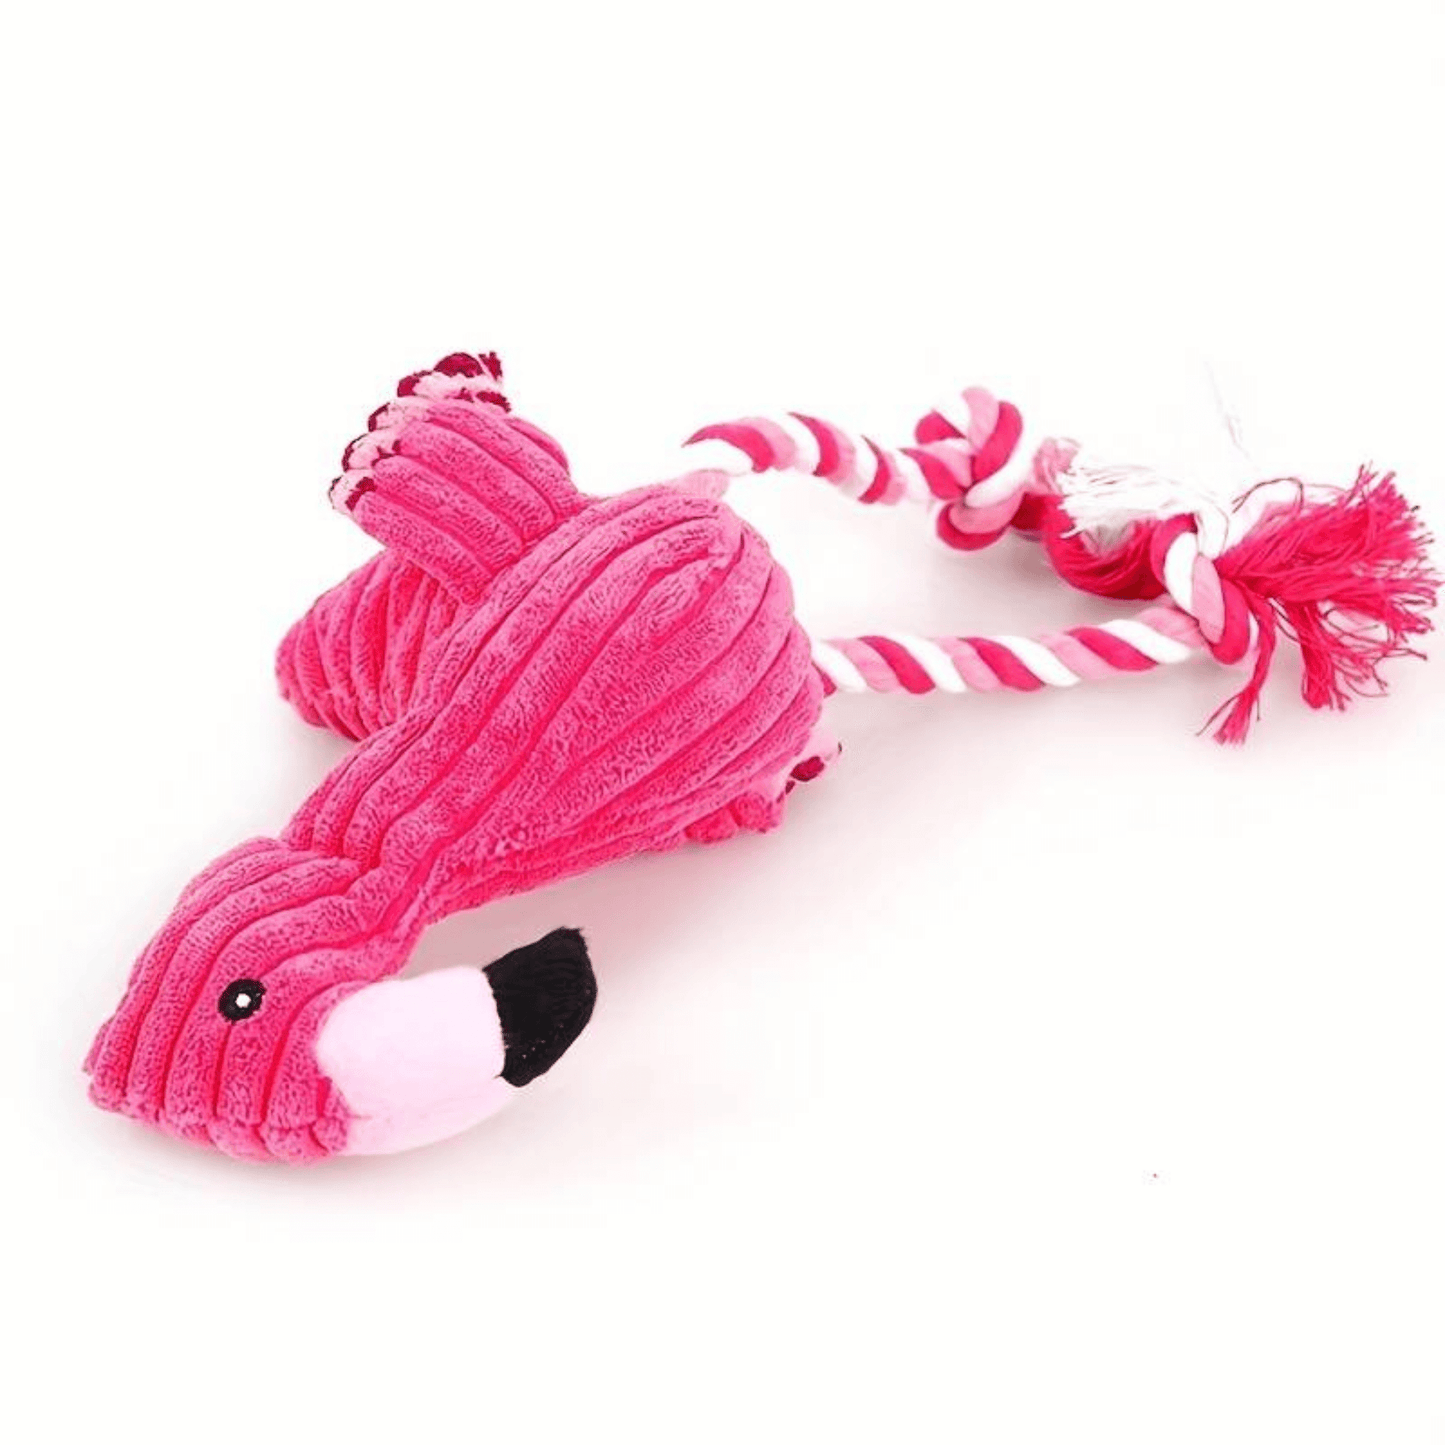 A side view of a pink flamingo dog toy. The toy has a long neck and legs, and it is made of soft, plush material. The toy has a squeaker inside that will make a noise when your dog chews on it. The toy is perfect for both large and small dogs, and it is sure to keep your furry friend entertained.